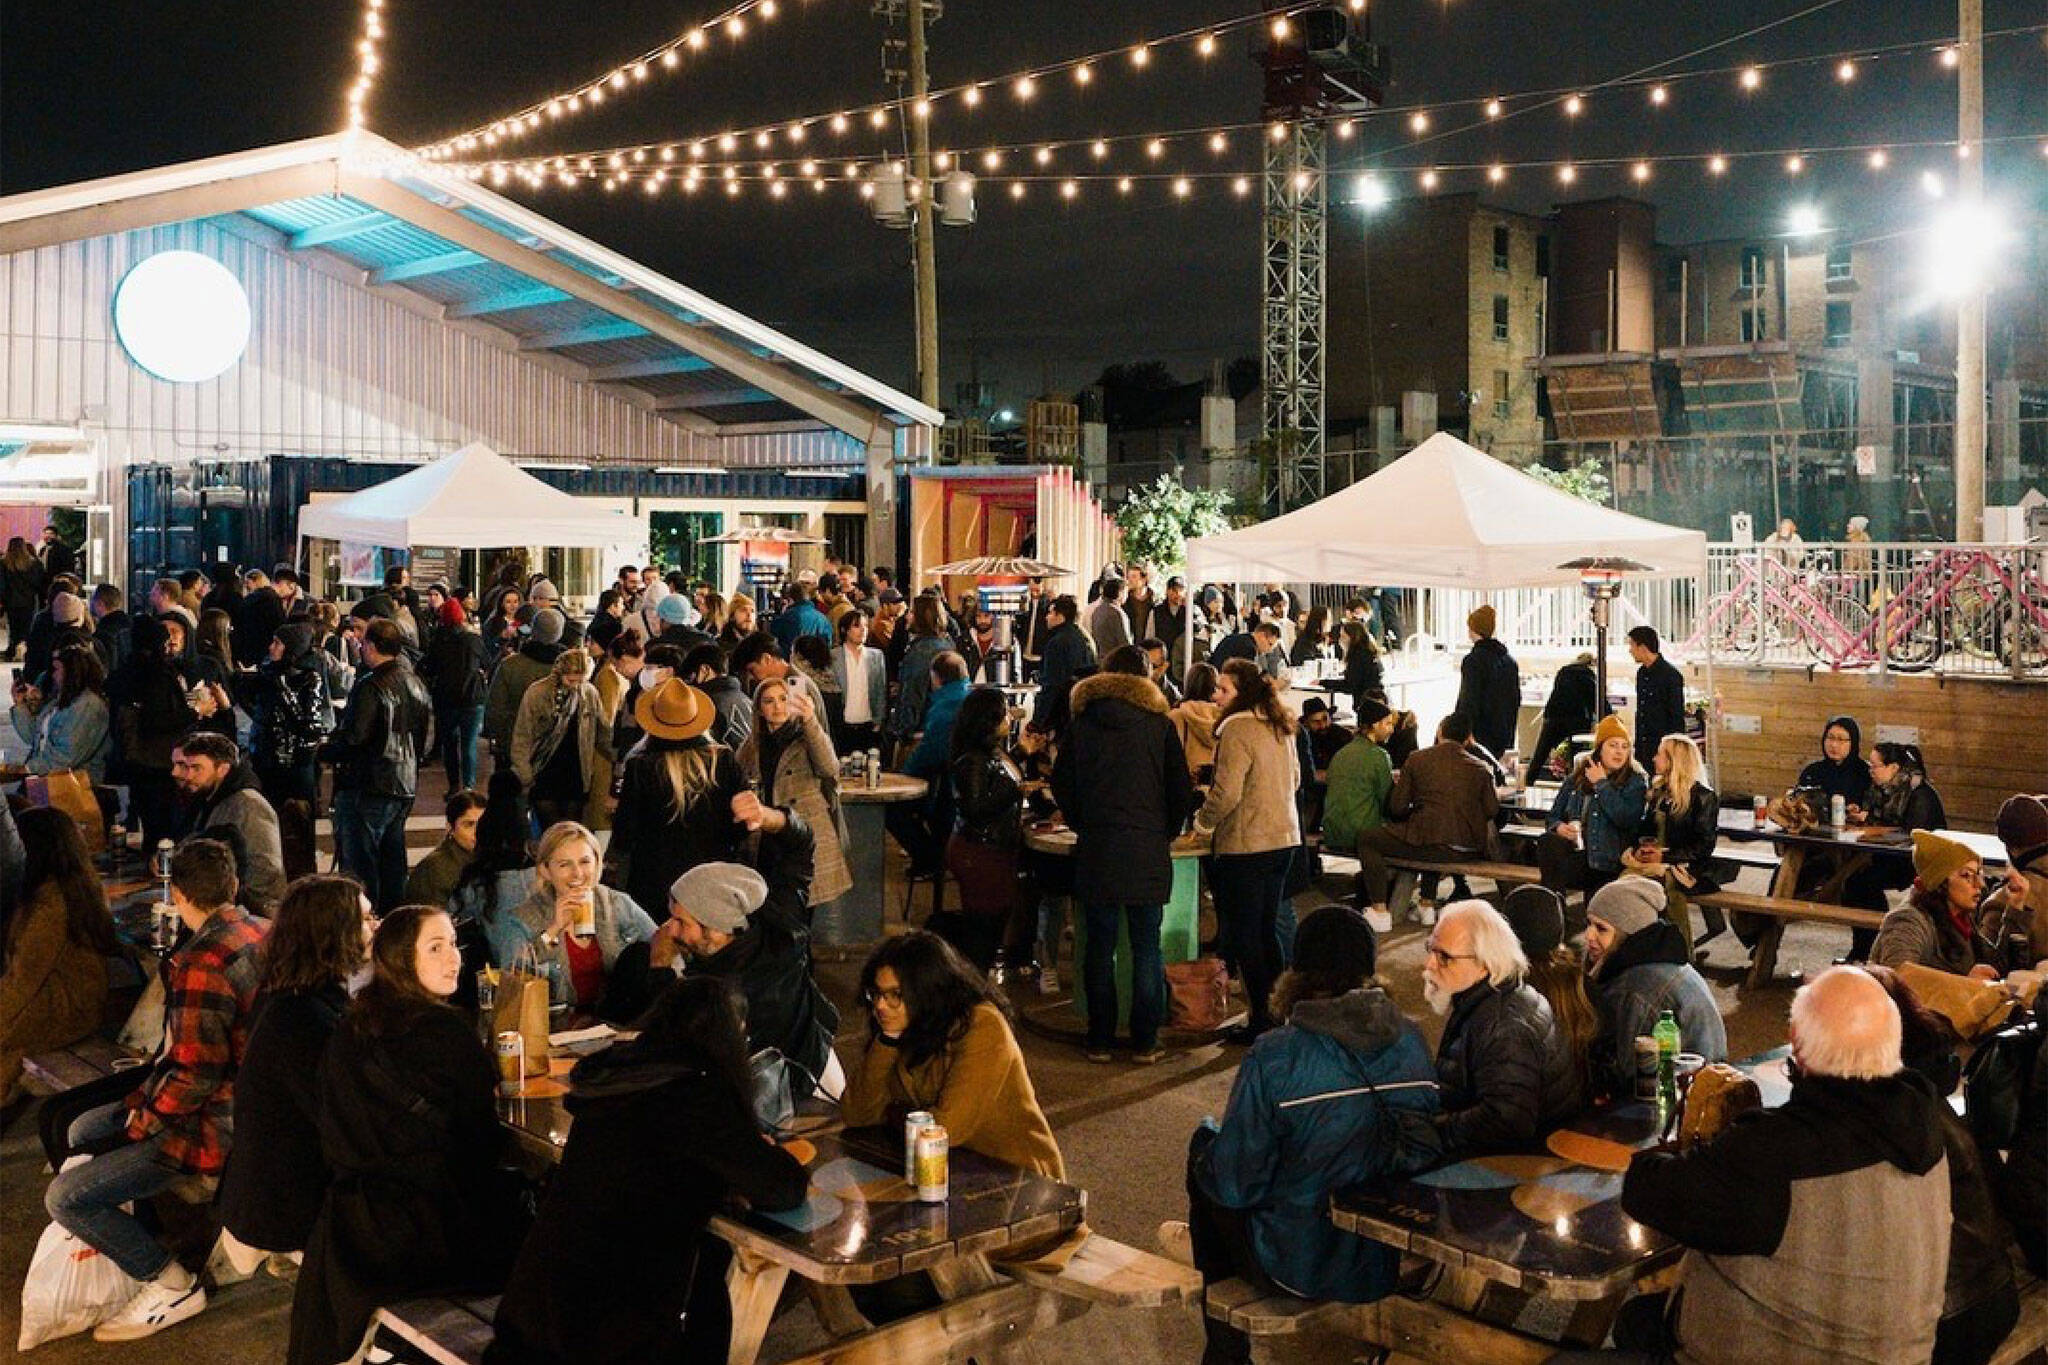 Toronto is getting an Asian night market this weekend